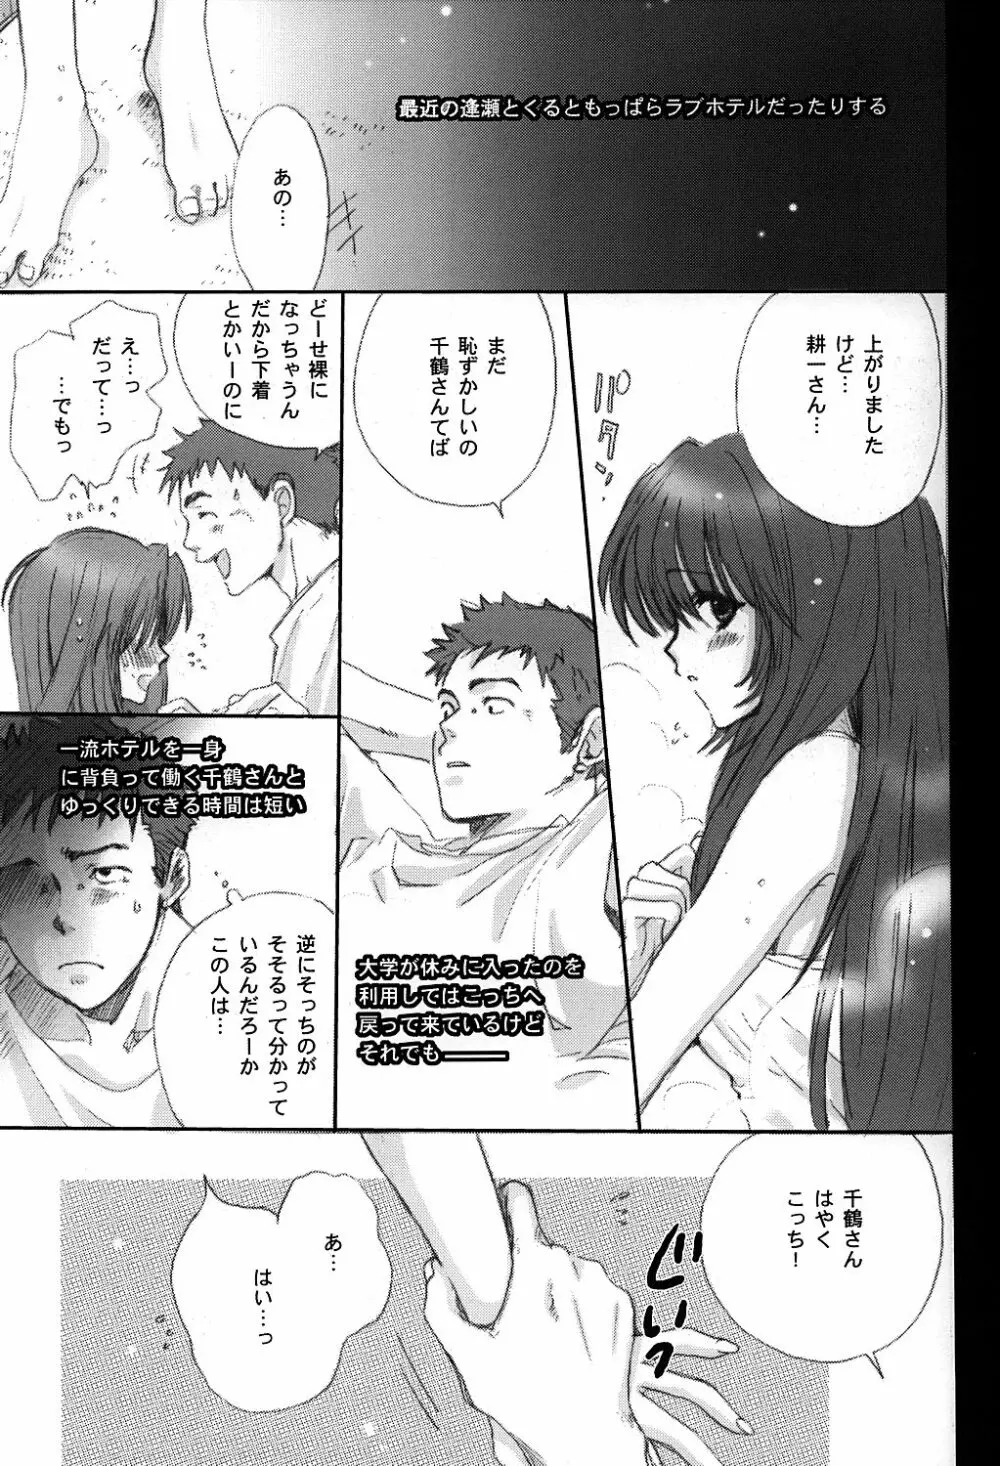 LOVE Page.6